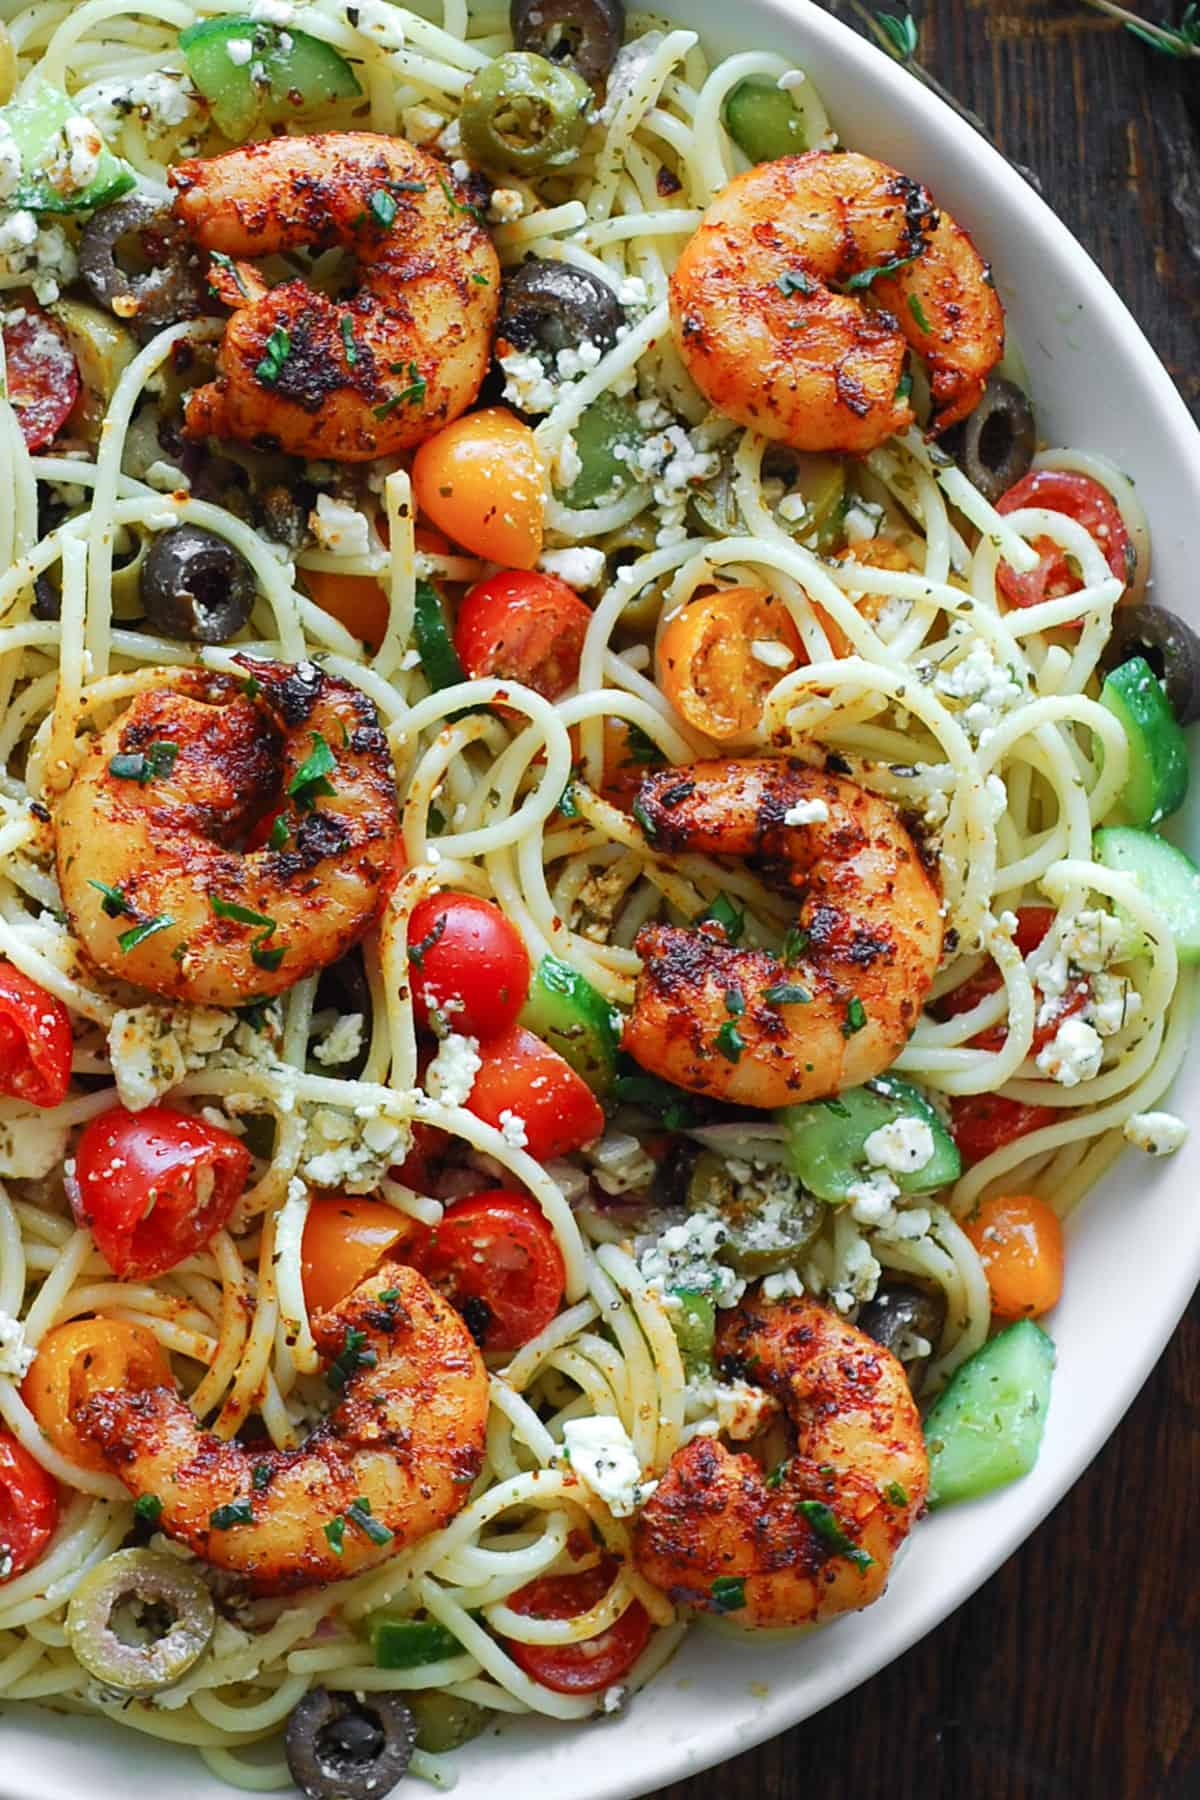 Garlic shrimp spaghetti with cherry tomatoes, olives, red onion, cucumber, feta cheese - in a white bowl. 